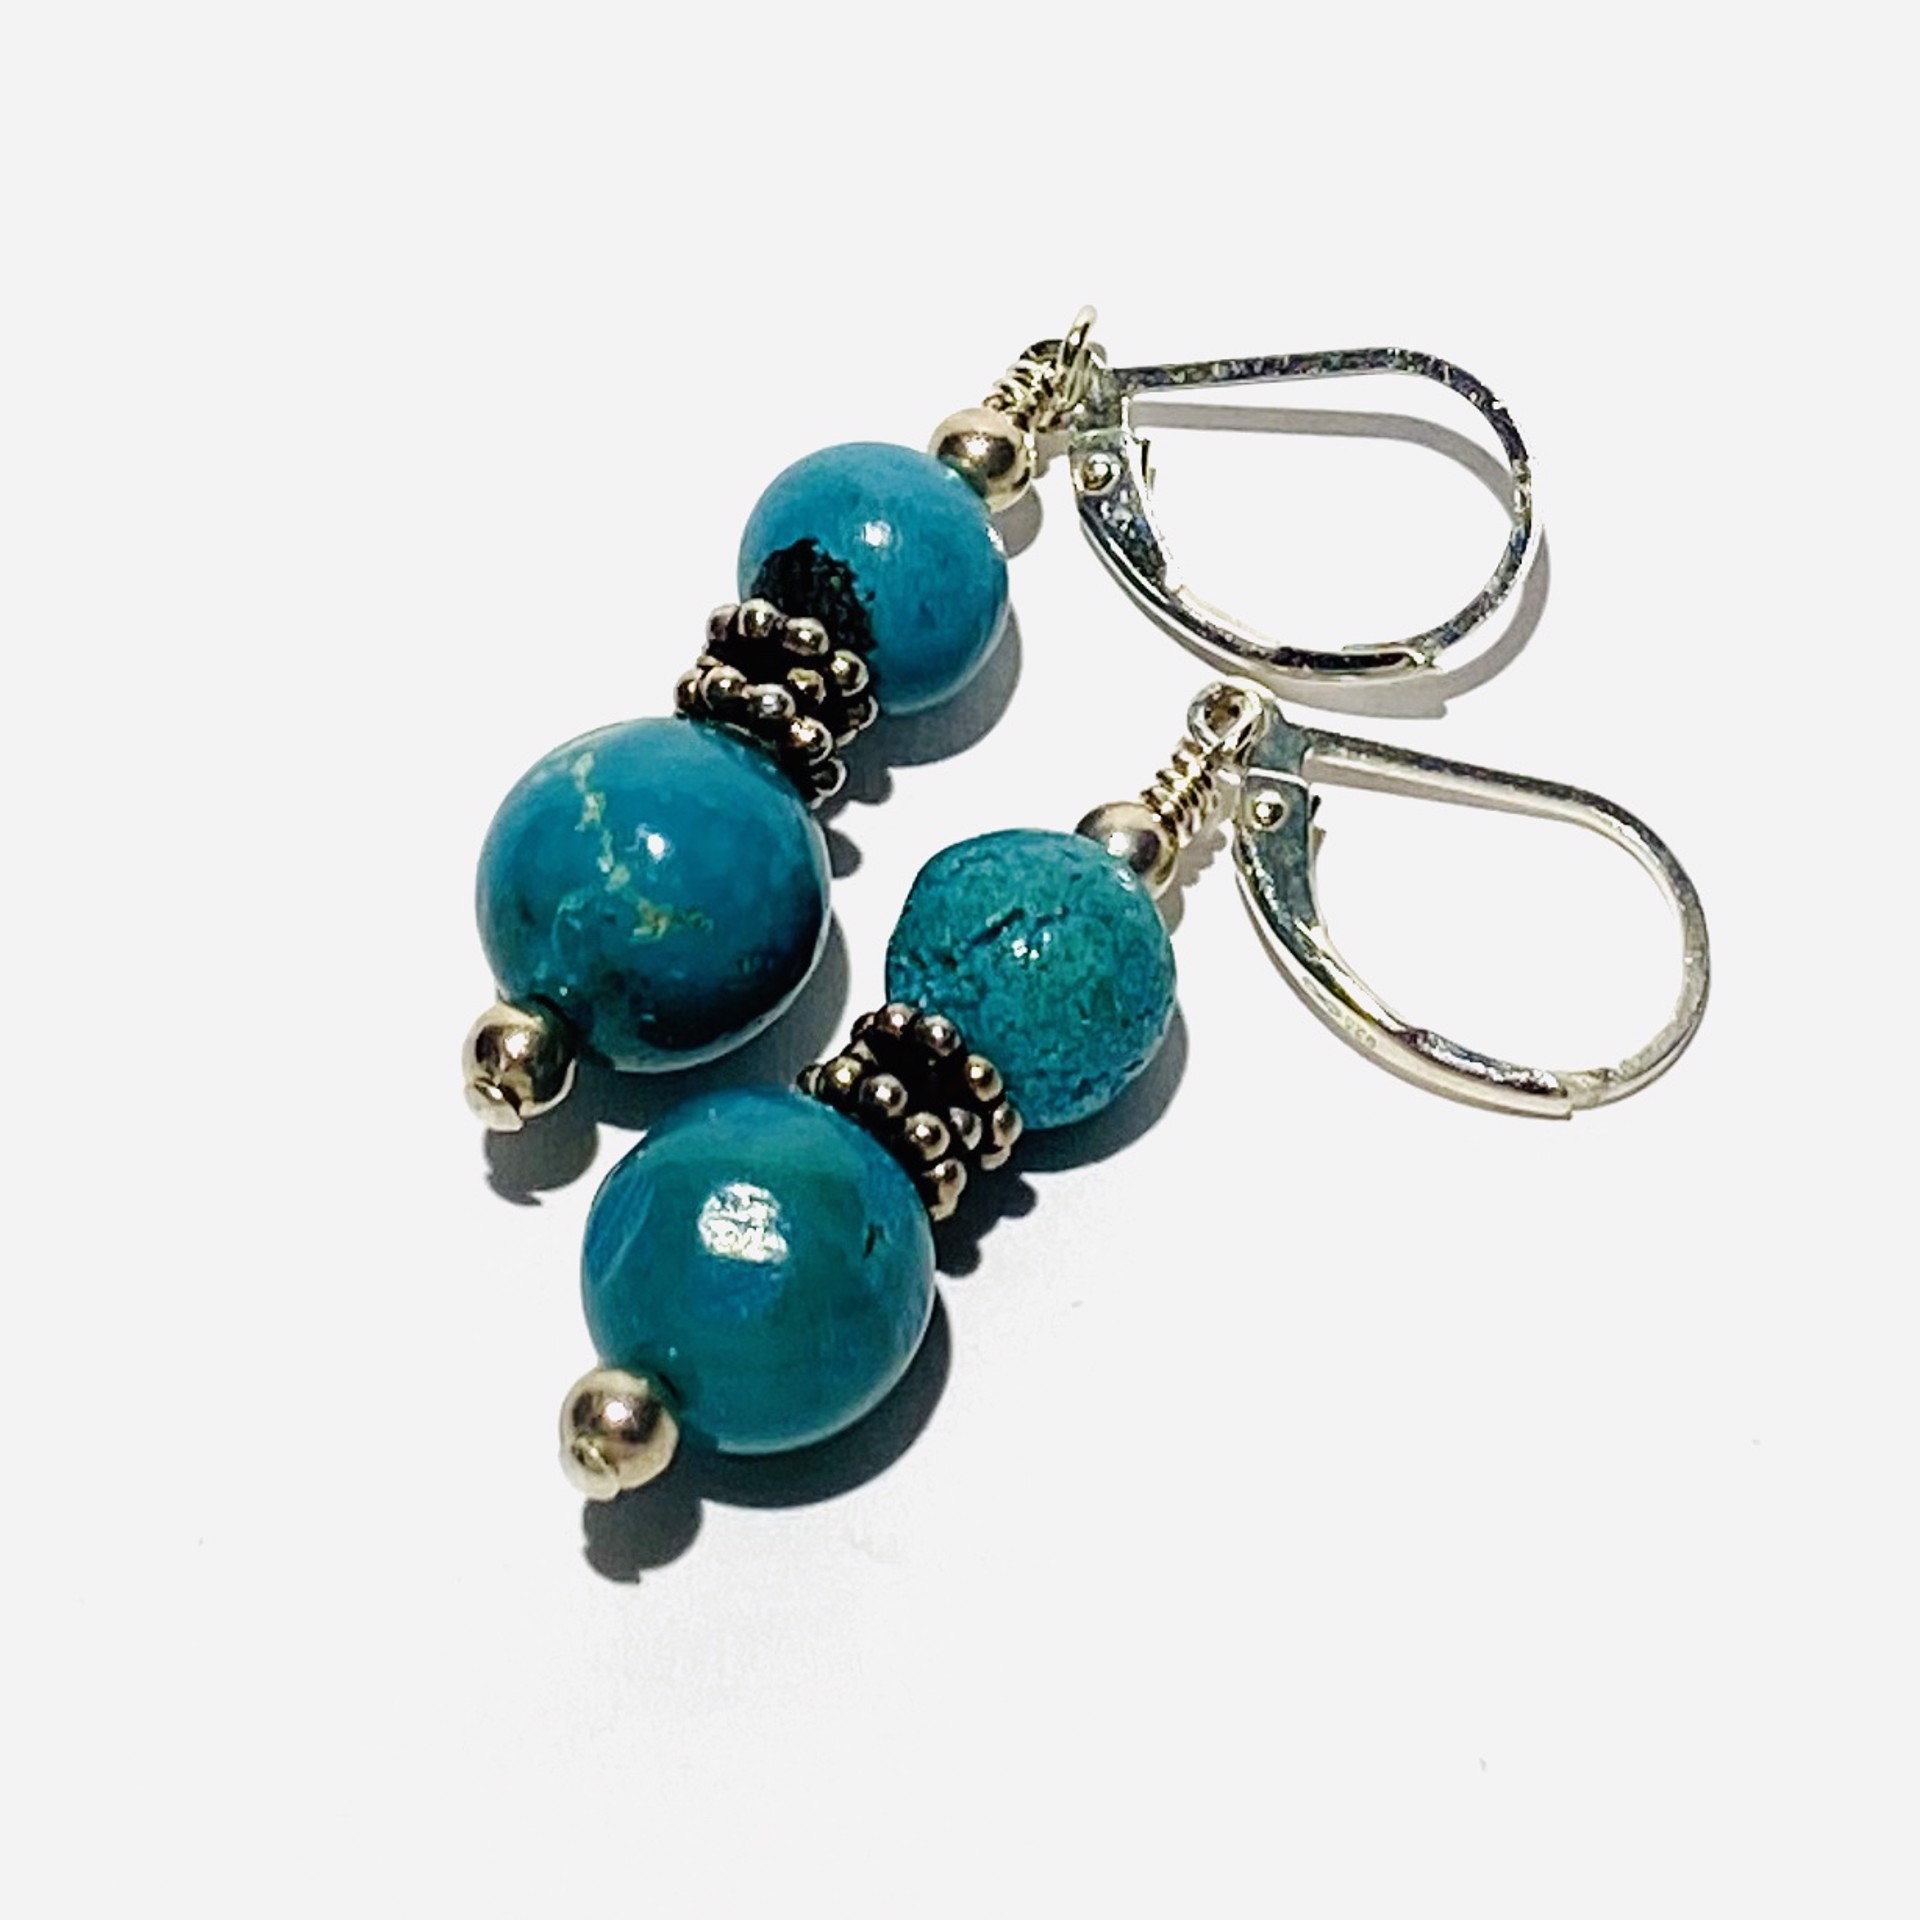 Turquoise Beads on Silver Earrings, E64 by Shoshannah Weinisch